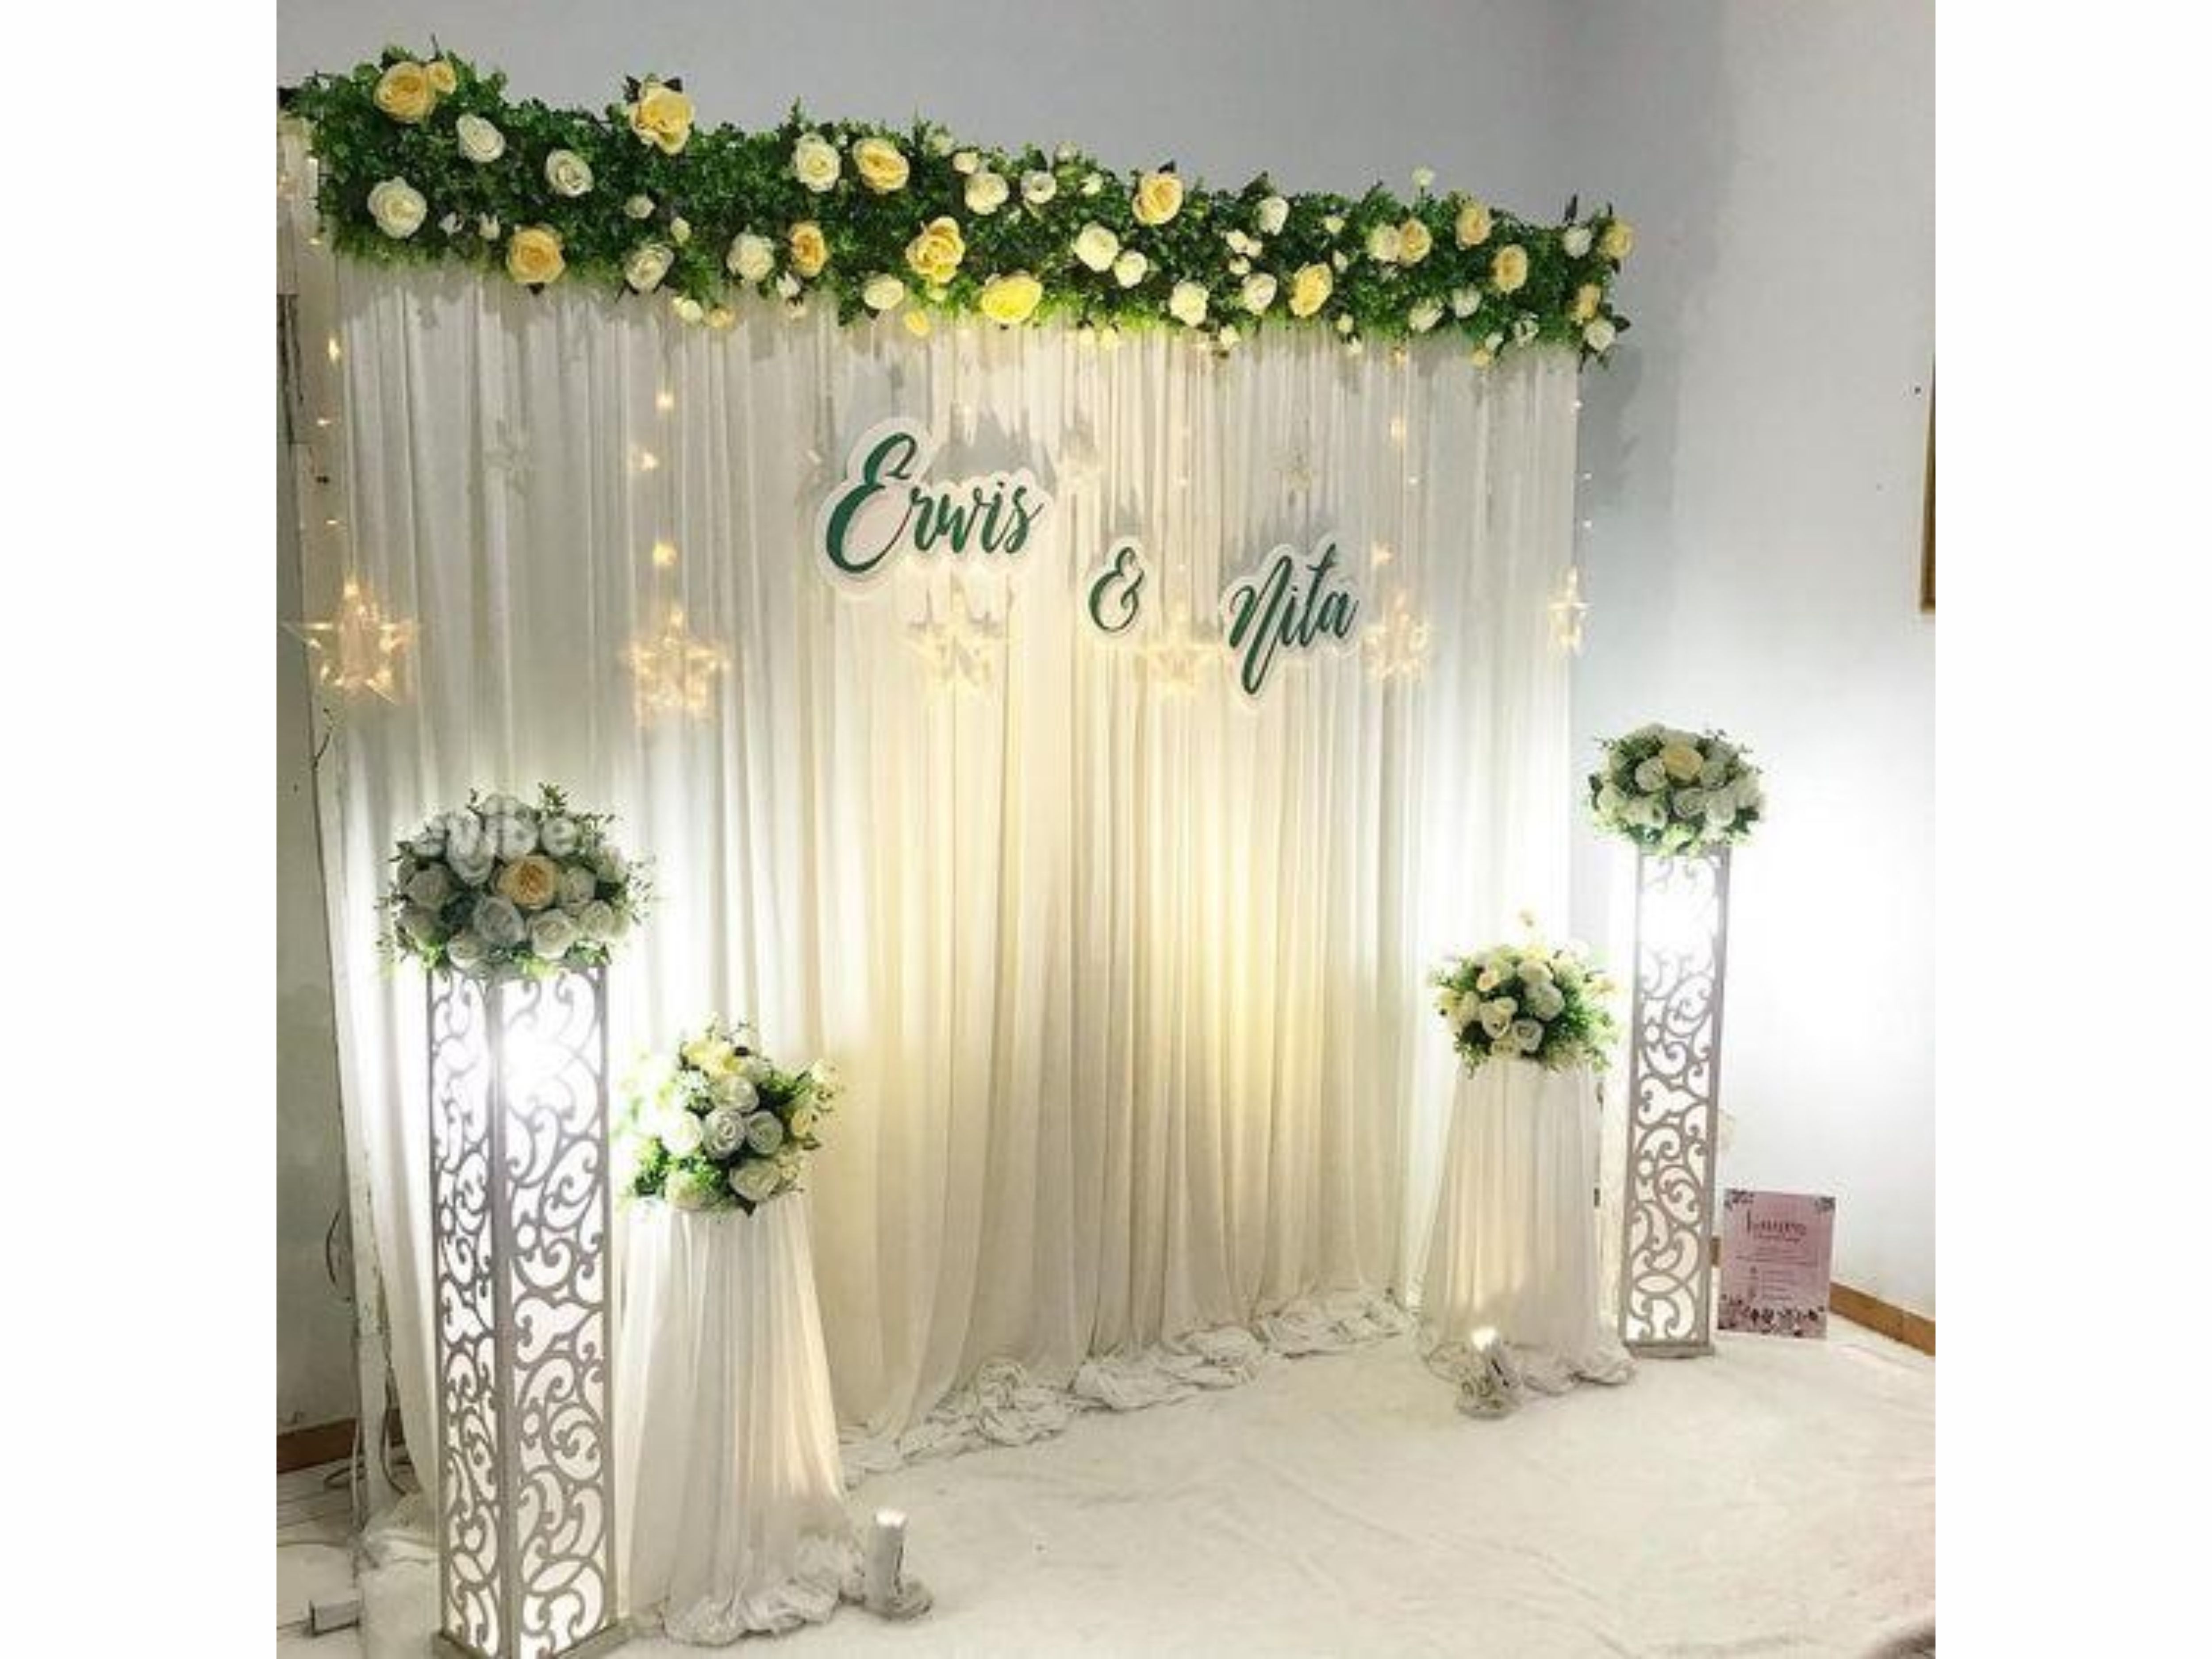 Engagement decorations bangalore - Best Birthday Party Organisers